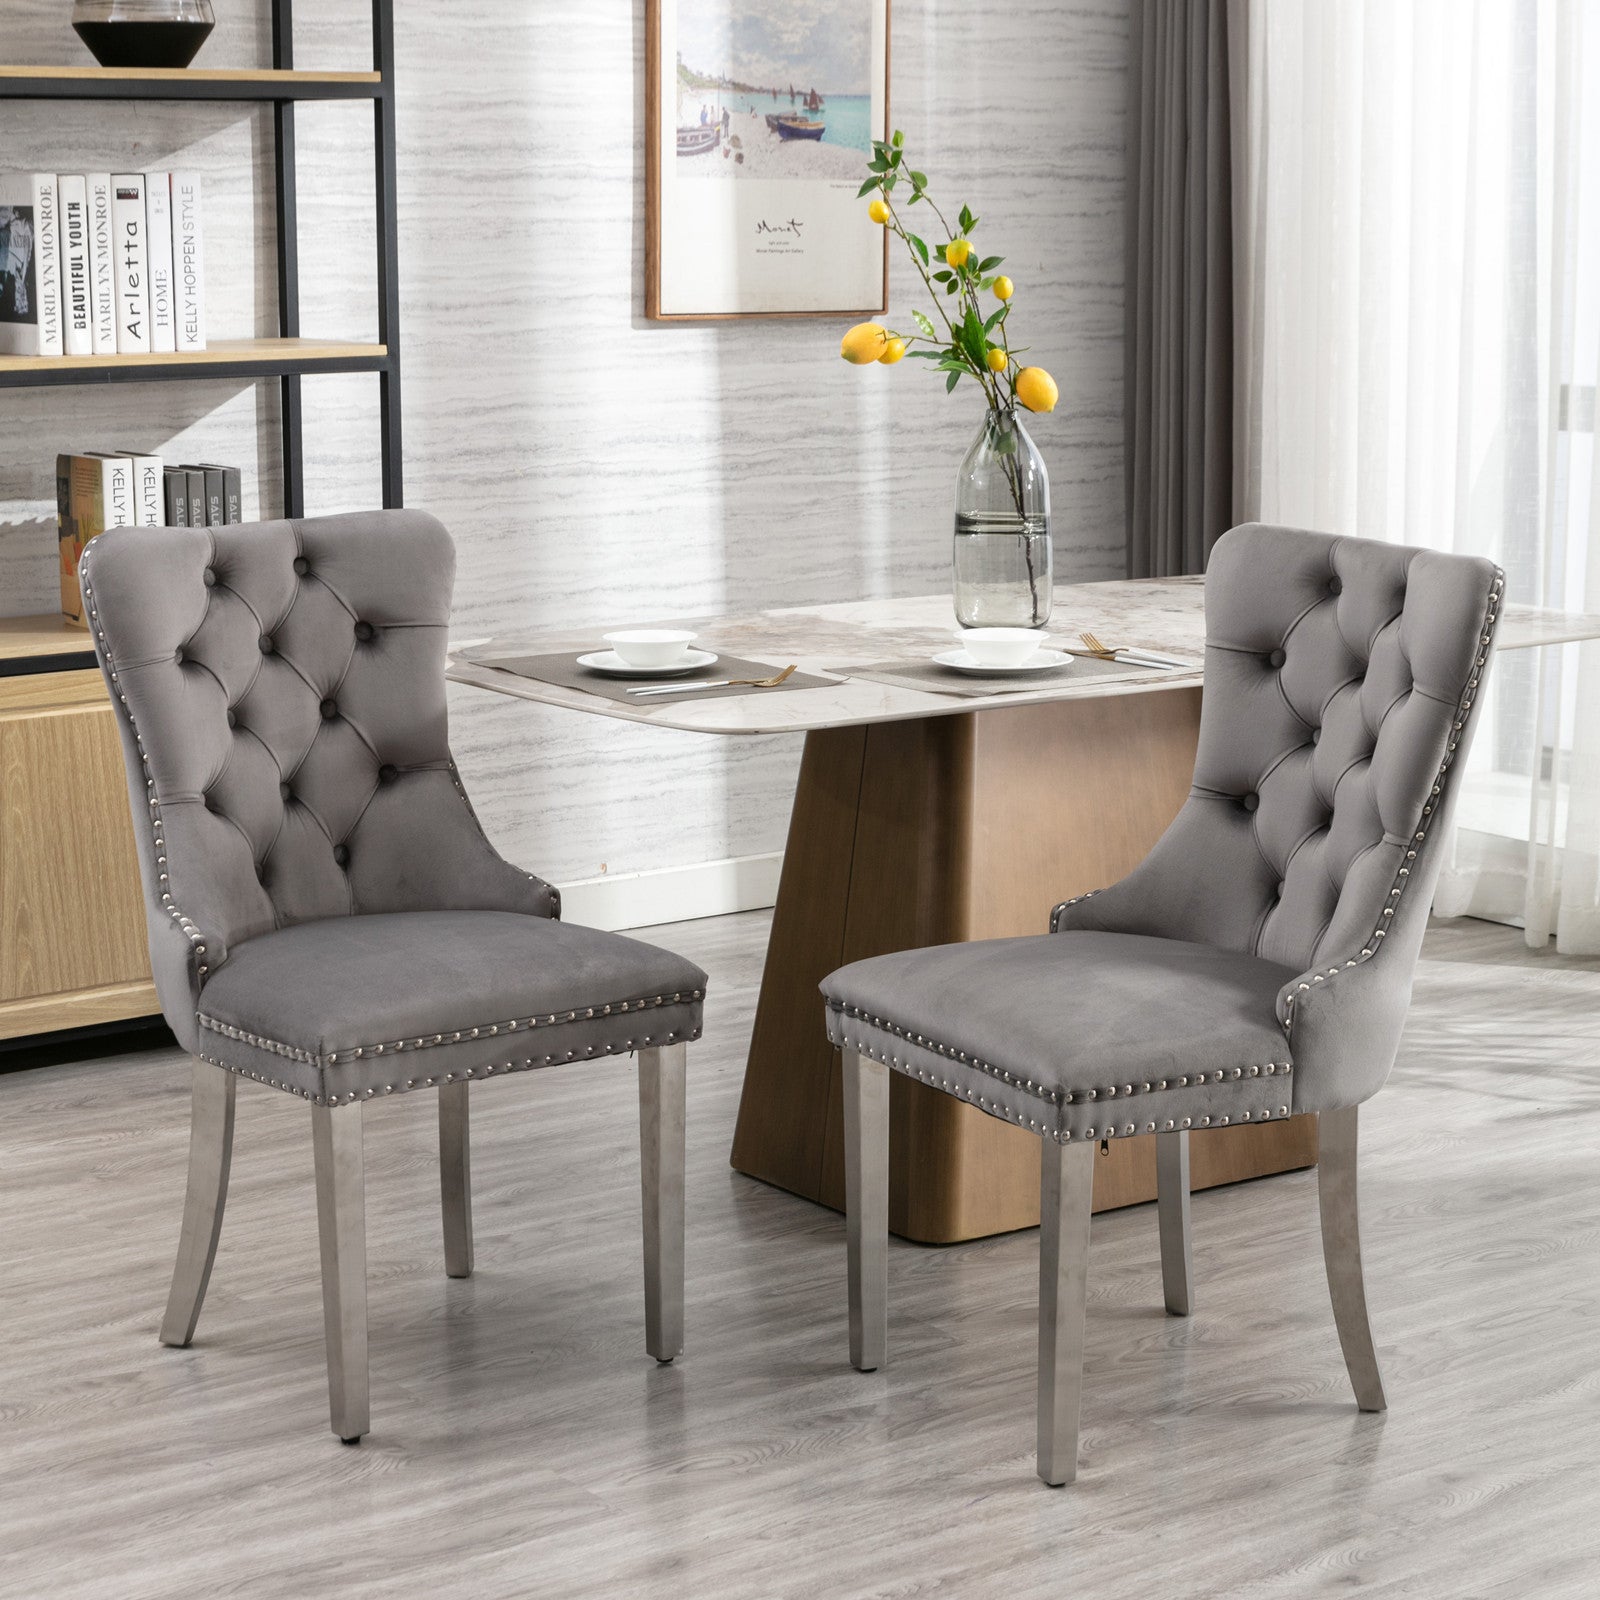 🆓🚛 High-End Tufted Solid Wood Contemporary Velvet Upholstered Dining Chair With Chrome Stainless Steel Plating Legs, Nailhead Trim, Set of 2, Gray and Chrome